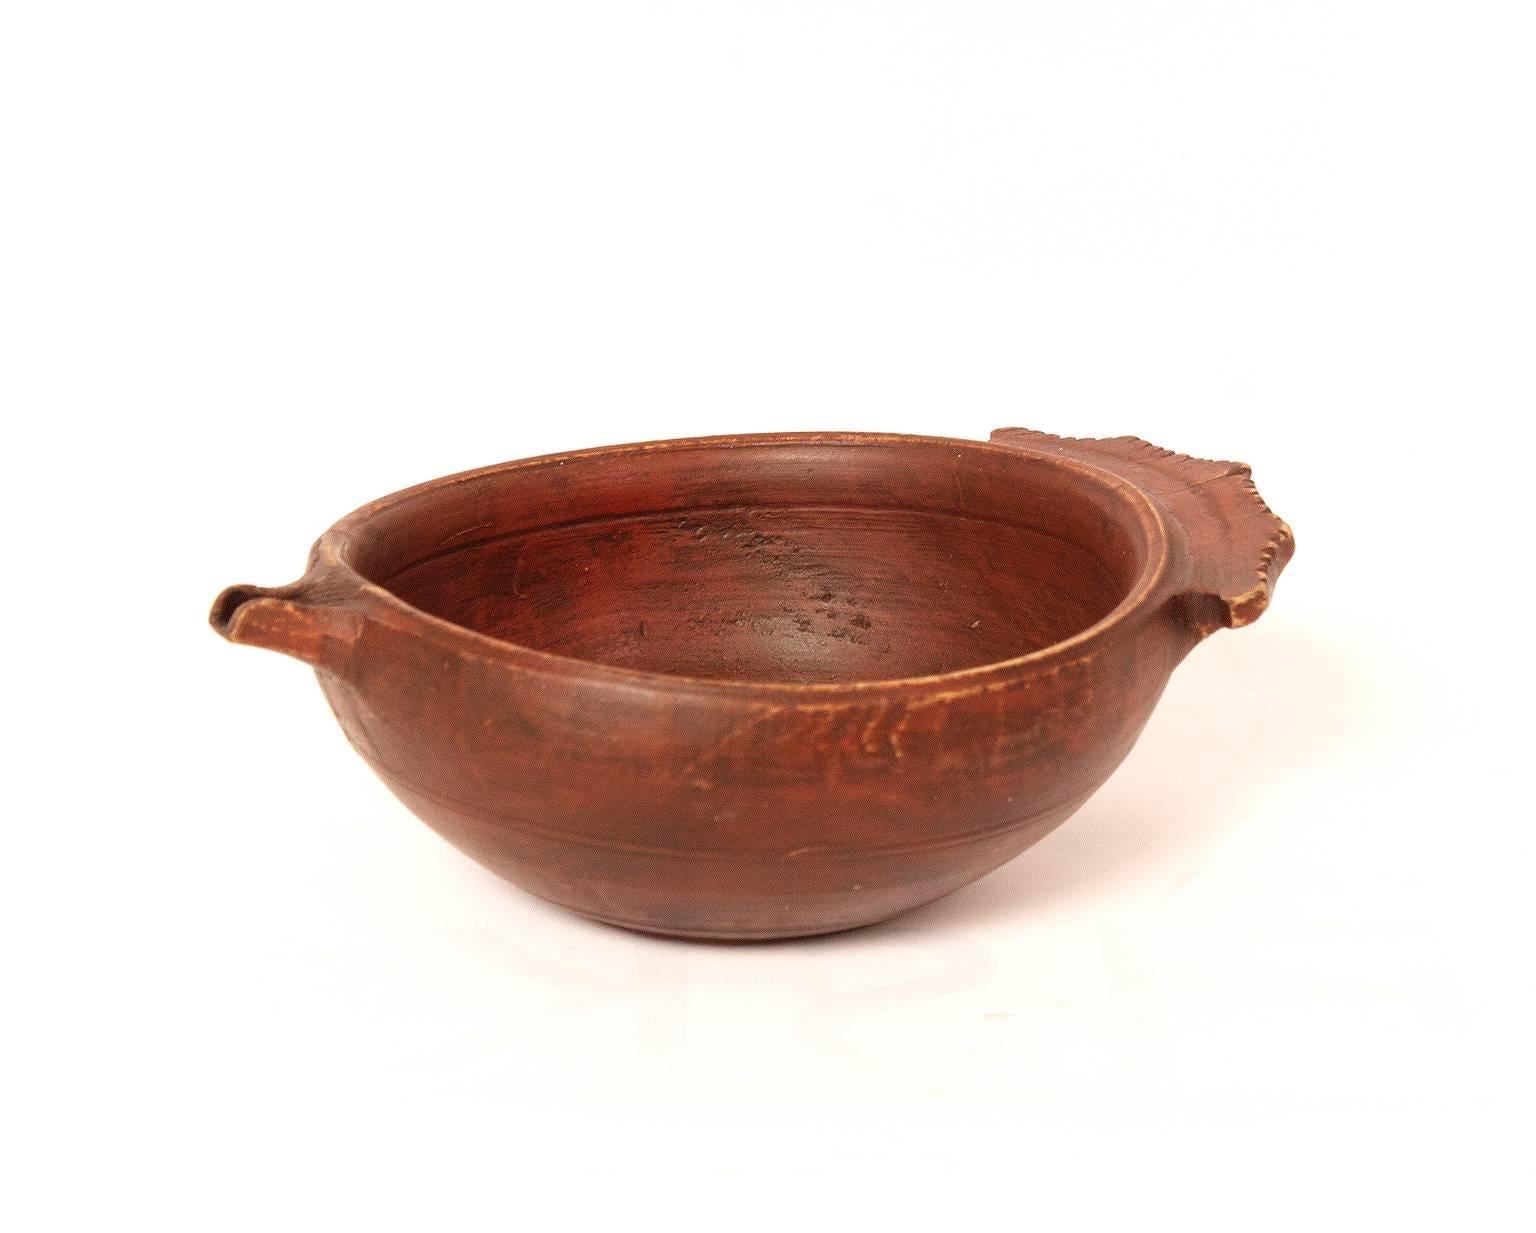 A 19th century small red painted wooden ale bowl.